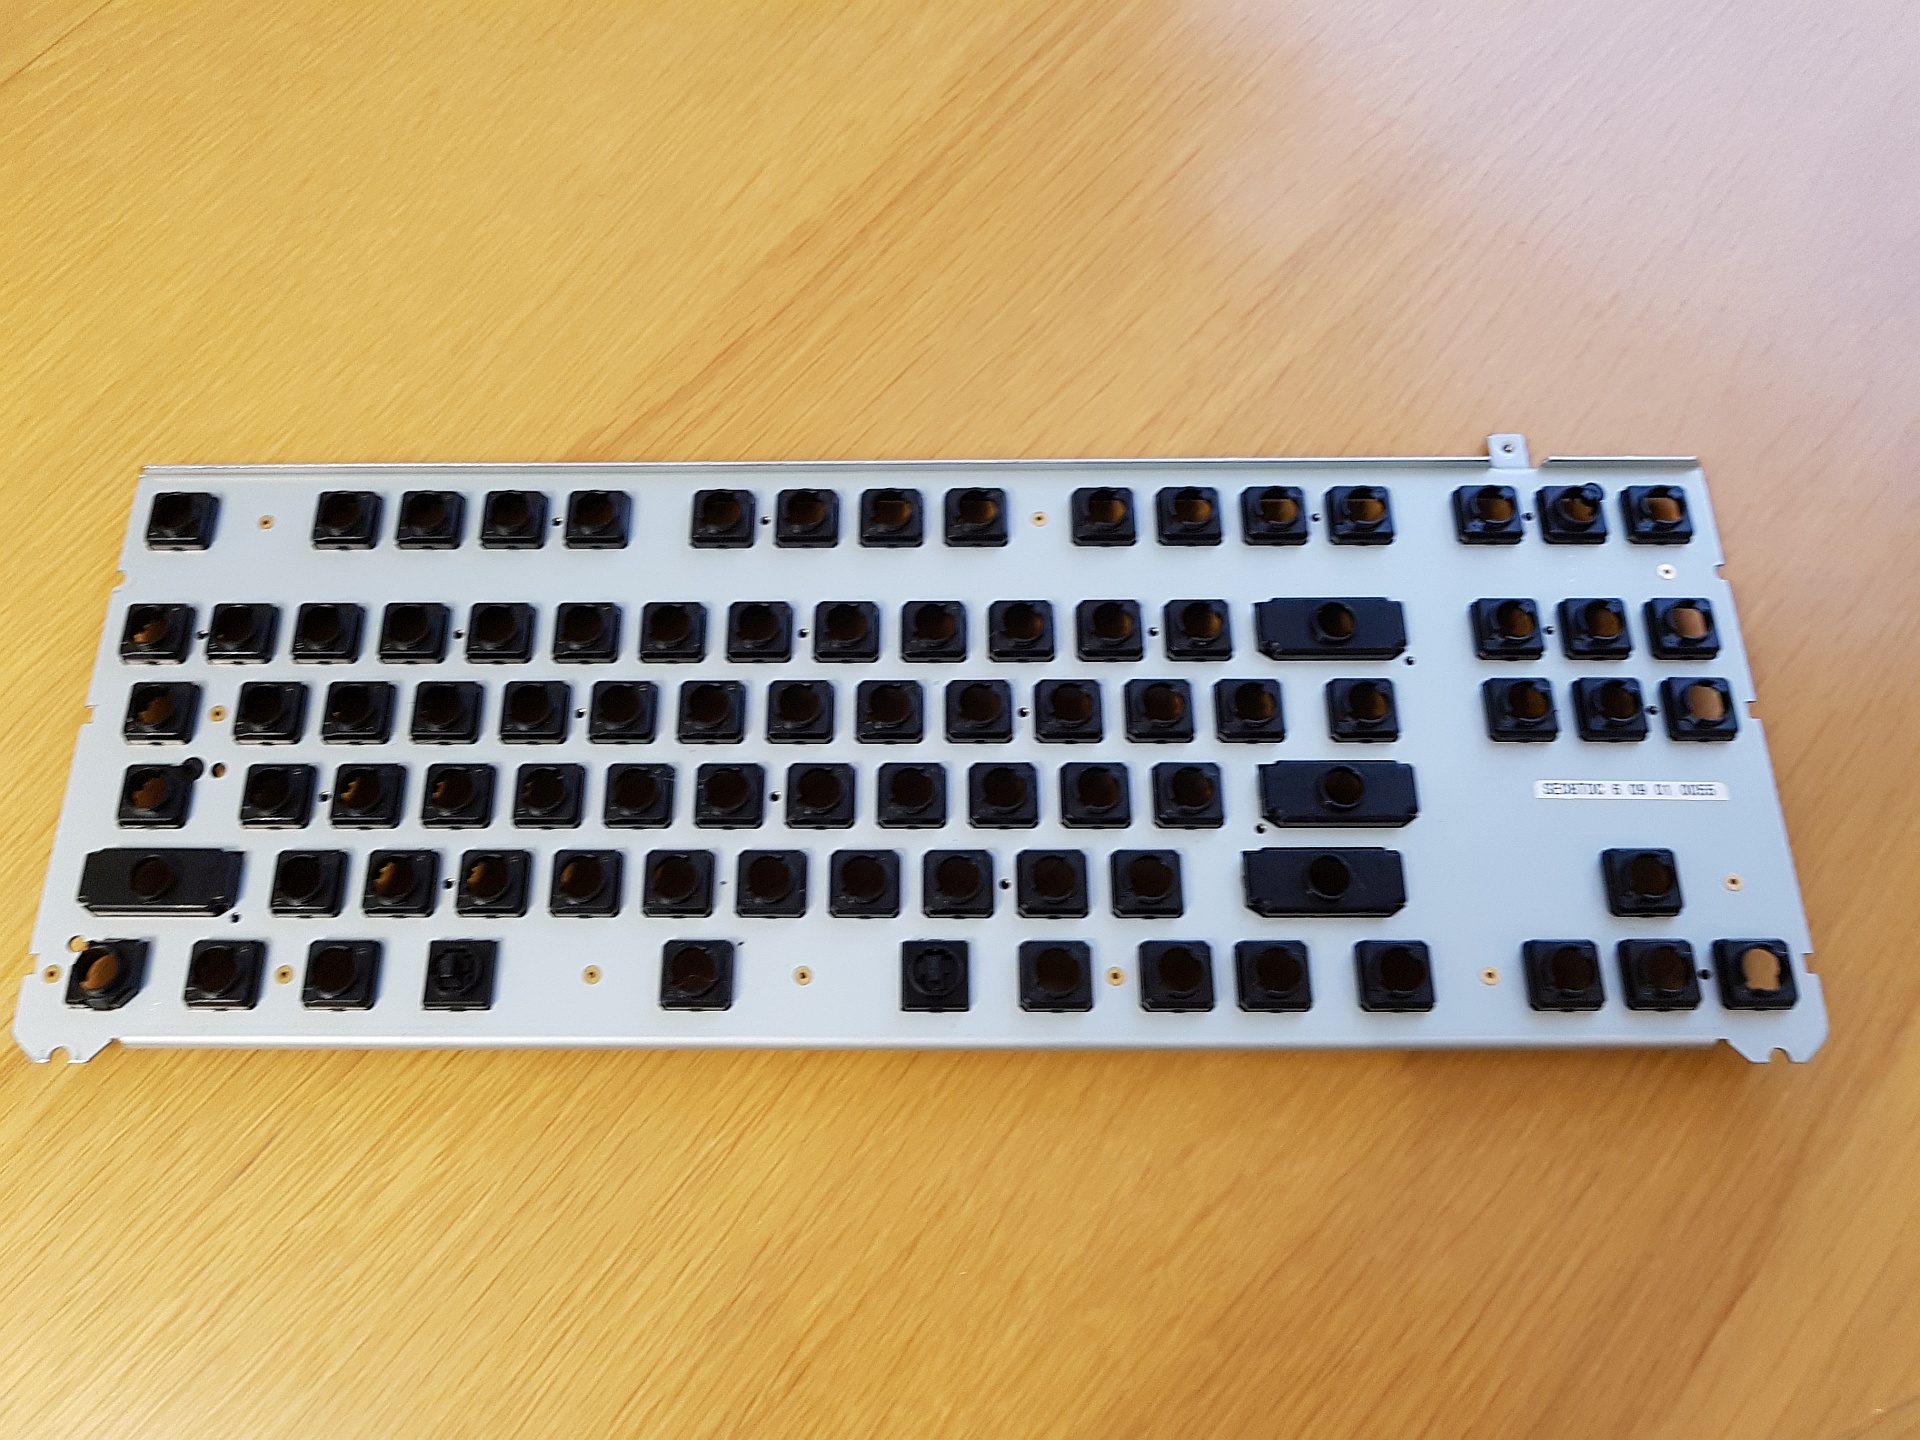 Phinix Realforce Mod - Topre to MX - with full standard bottom row!